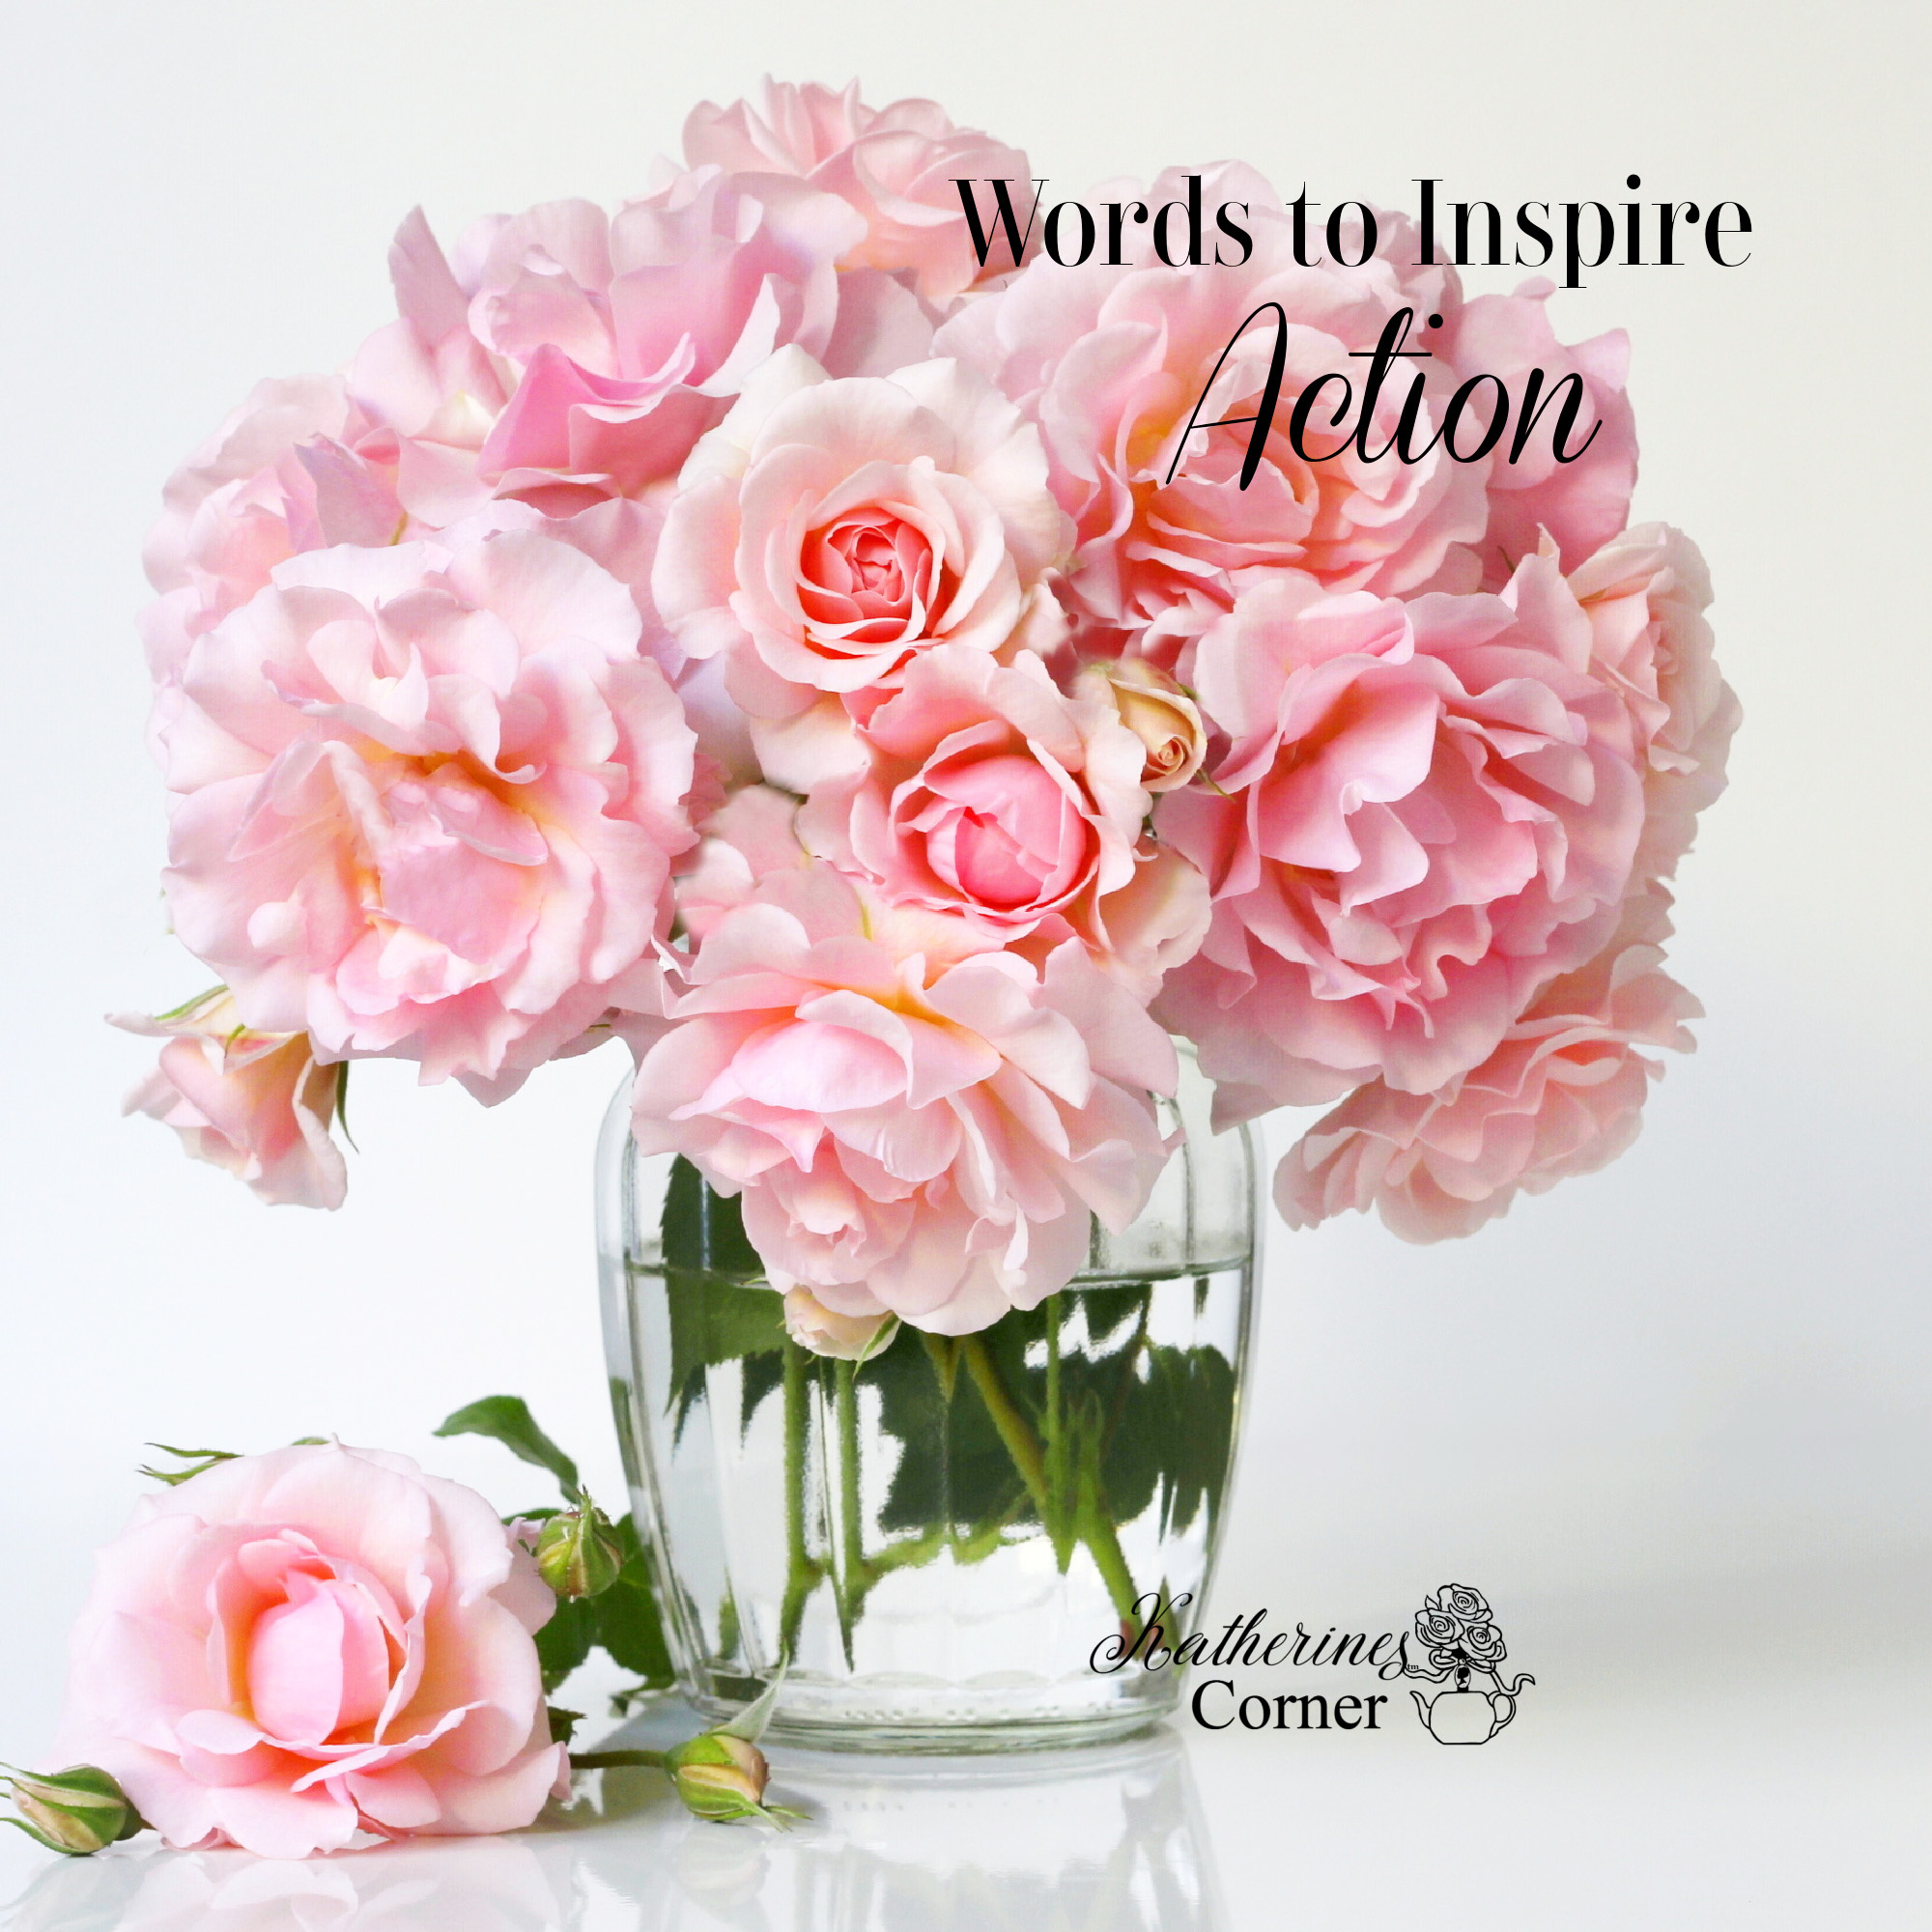 Words to Inspire Action